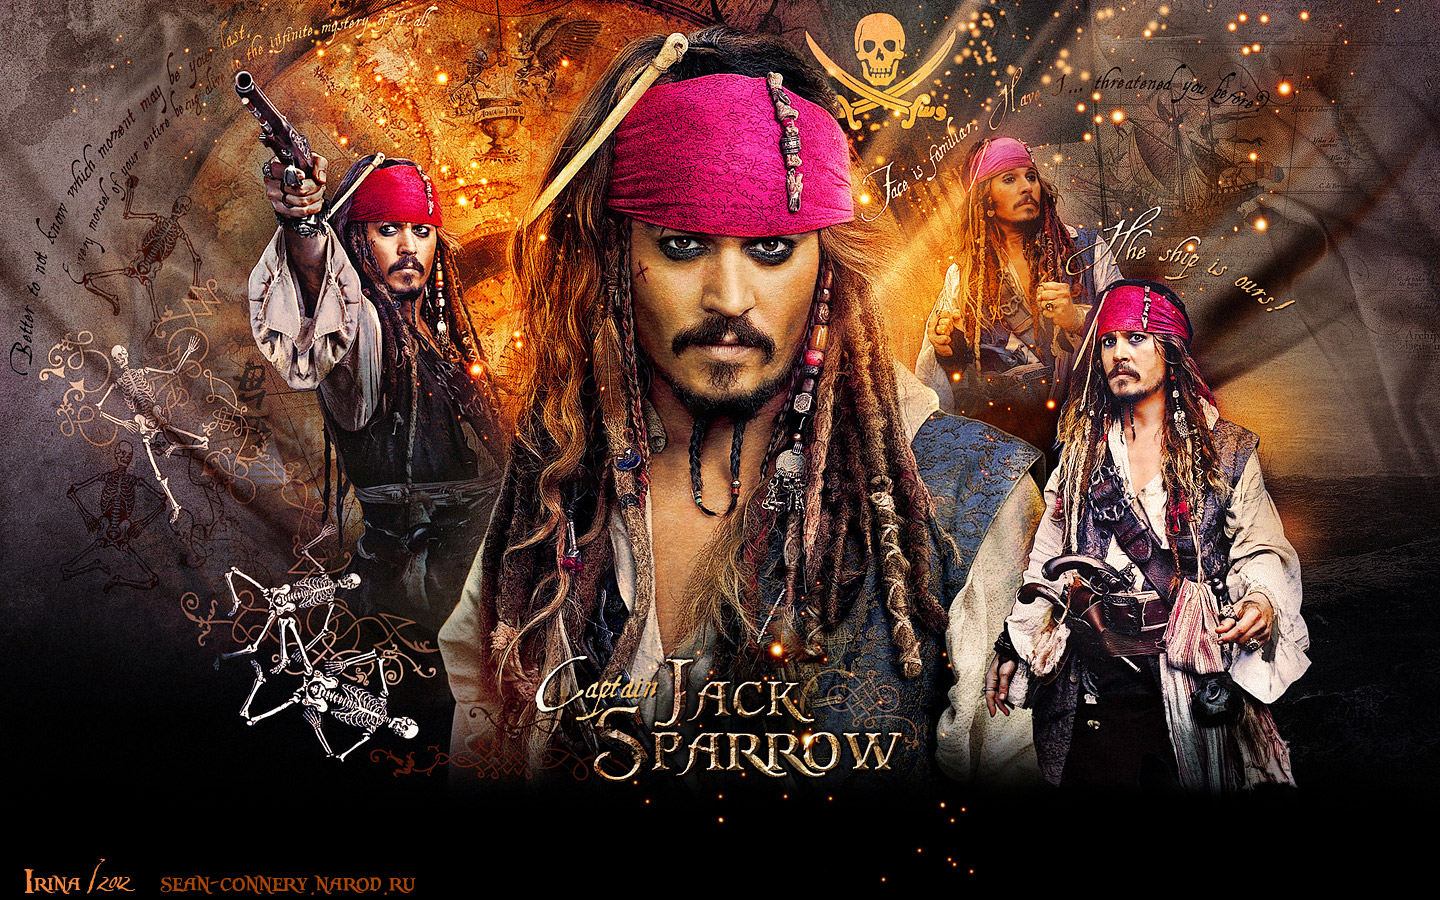 Pirates of the Caribbean Wallpaper 73 images